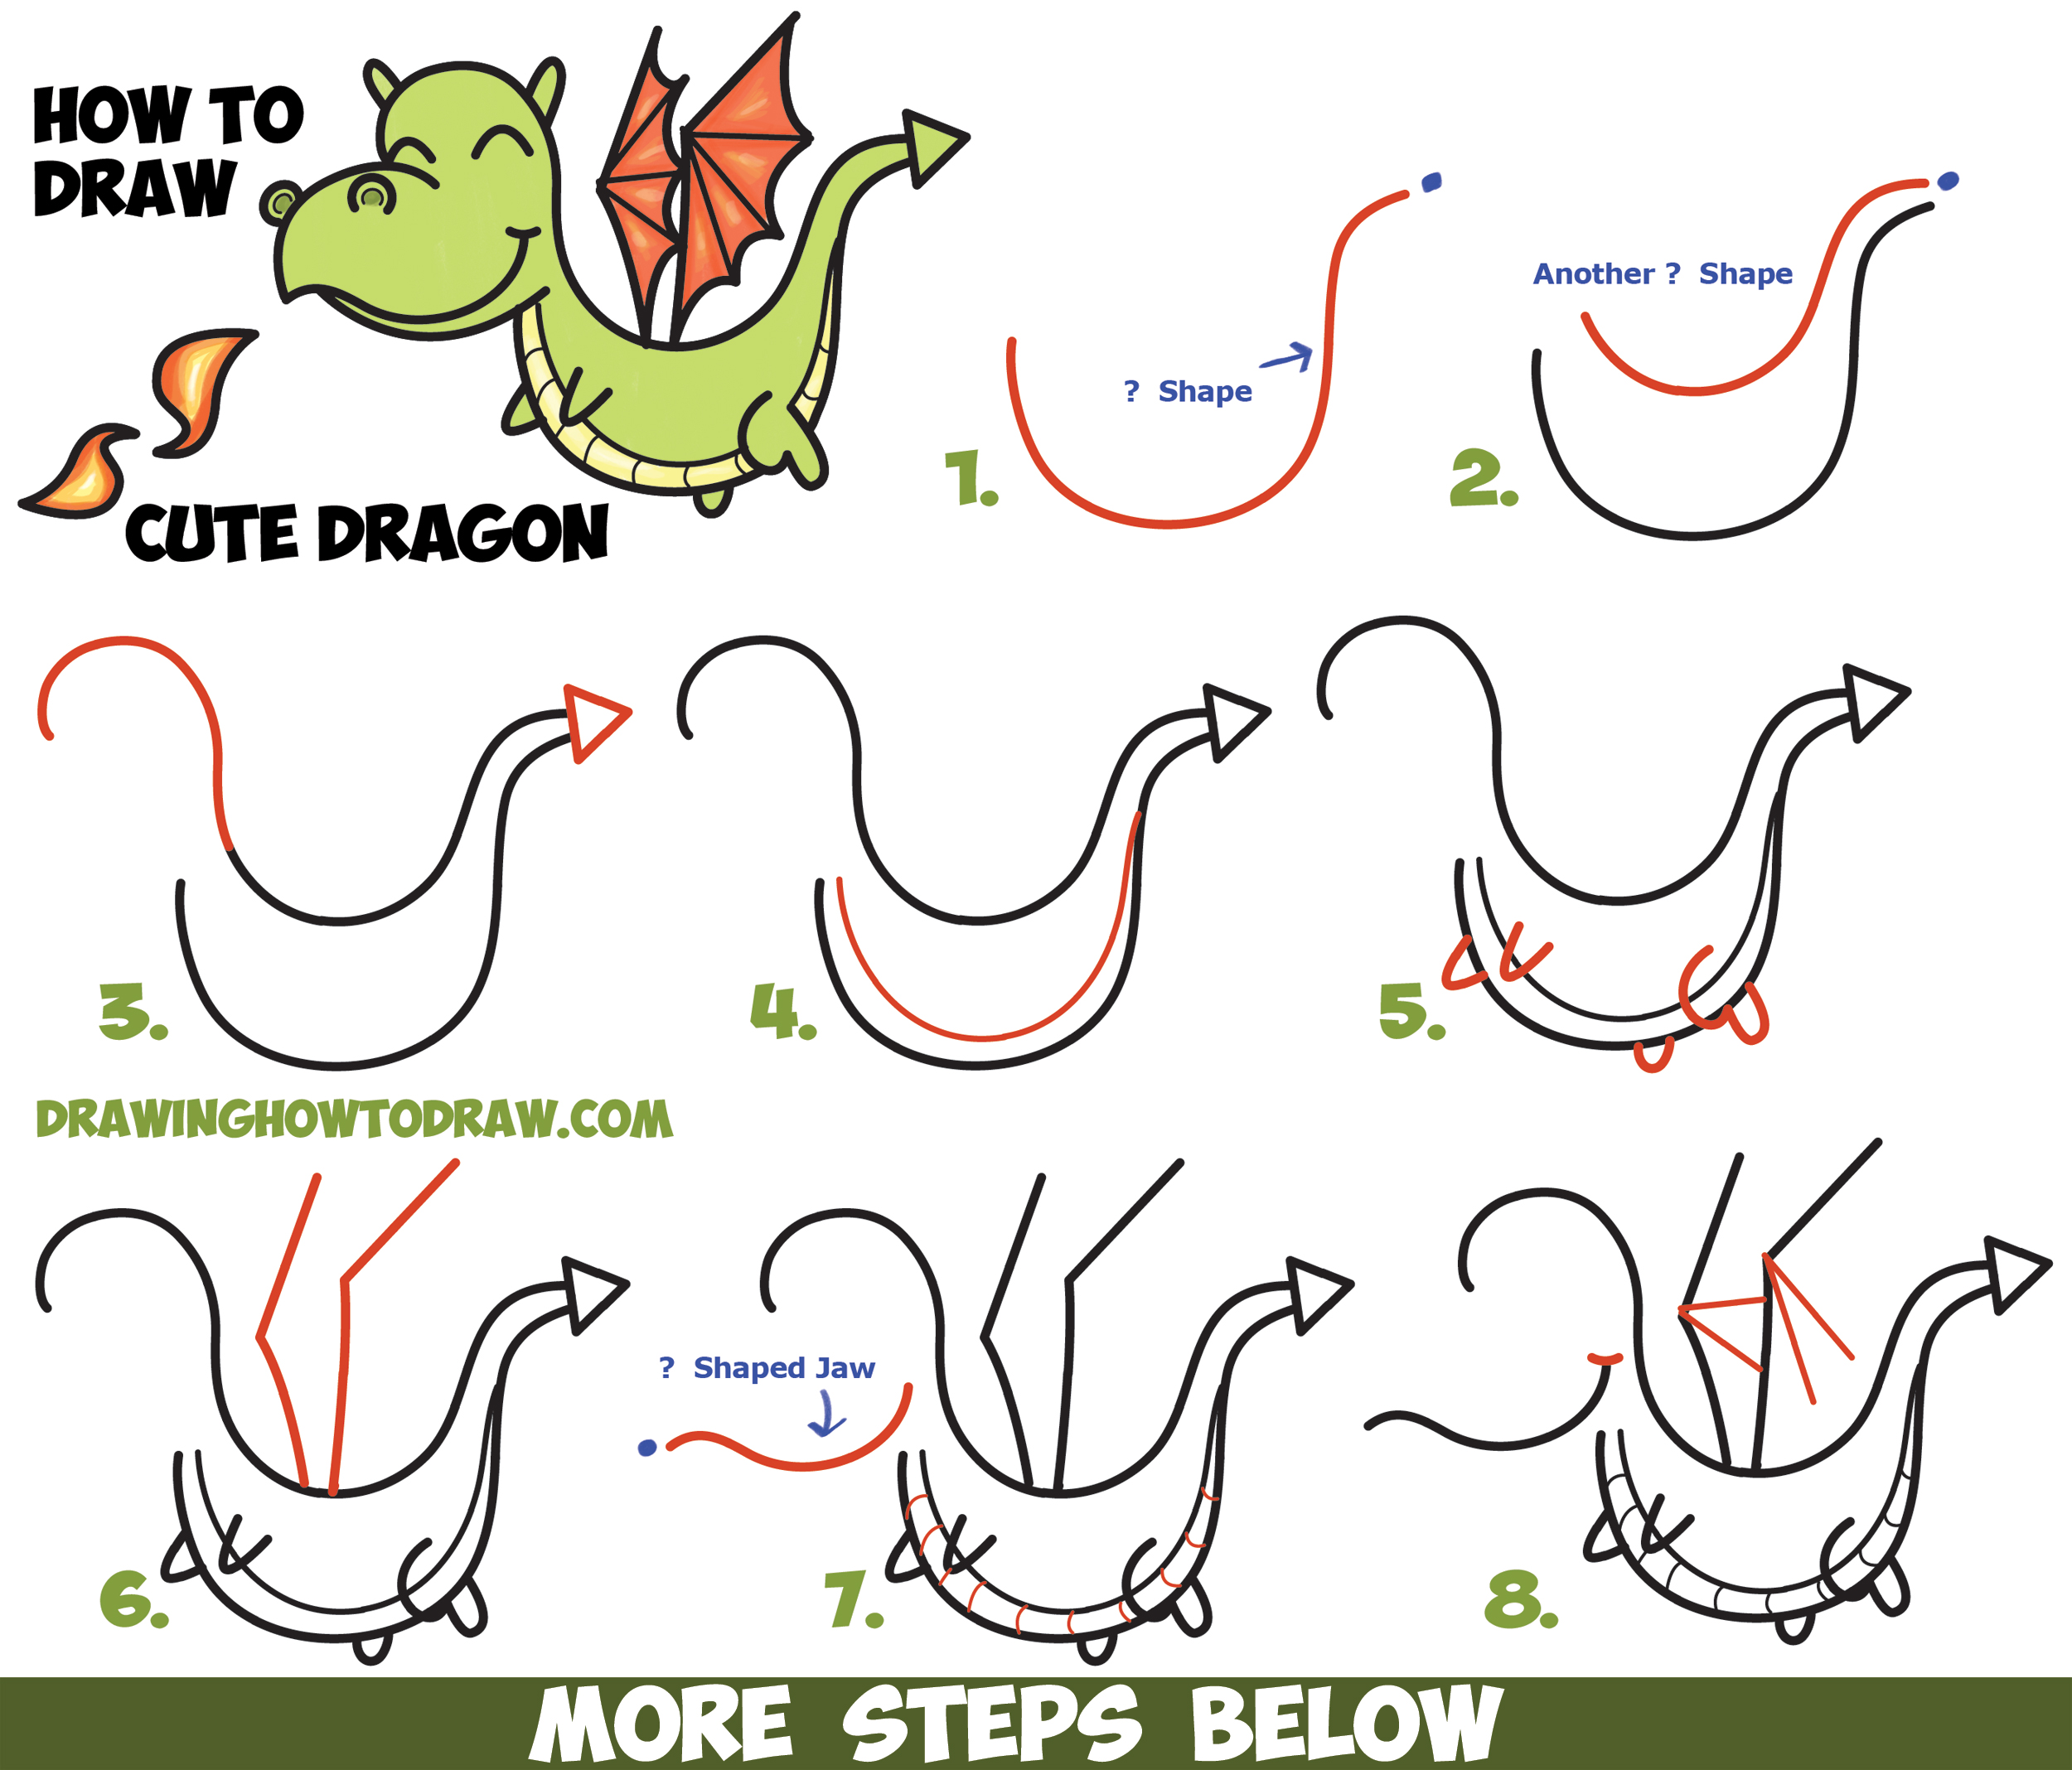 How to Draw a Cute Kawaii / Chibi Dragon Shooting Fire with Easy Step by Step Drawing Tutorial for Kids and Beginners